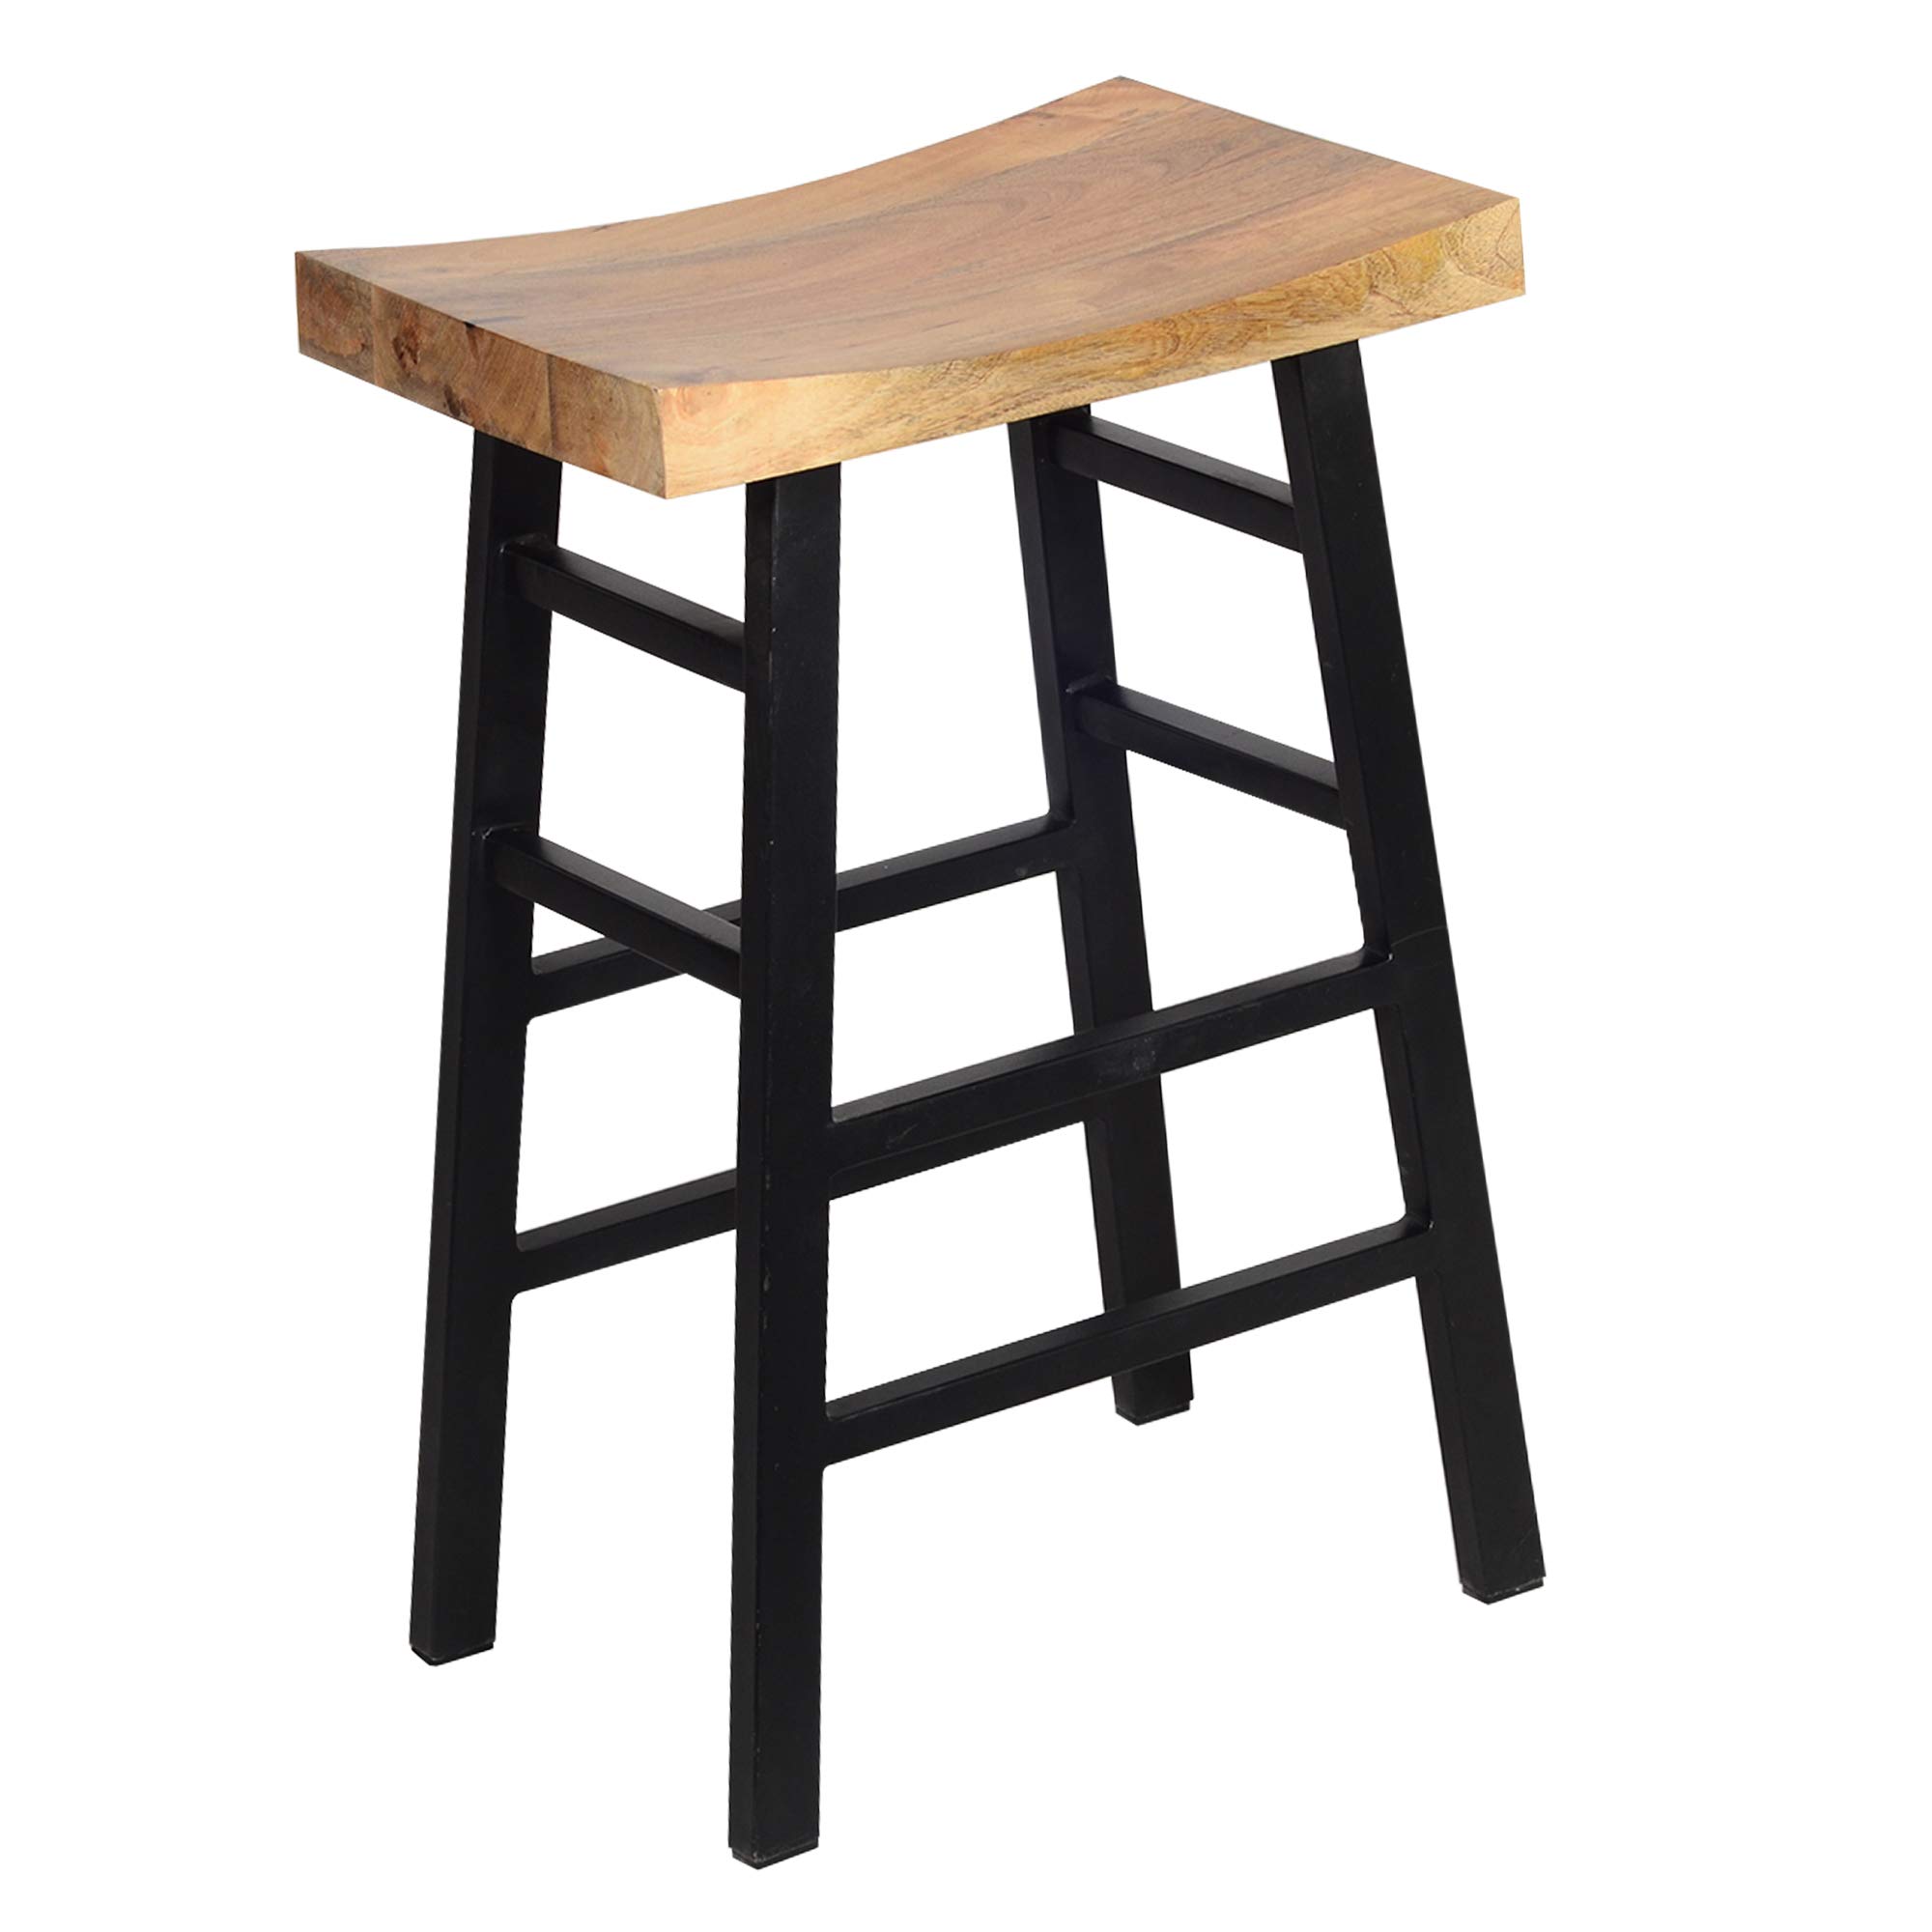 The Urban Port Wooden Saddle Seat 30 Inch Barstool with Ladder Base, Brown and Black